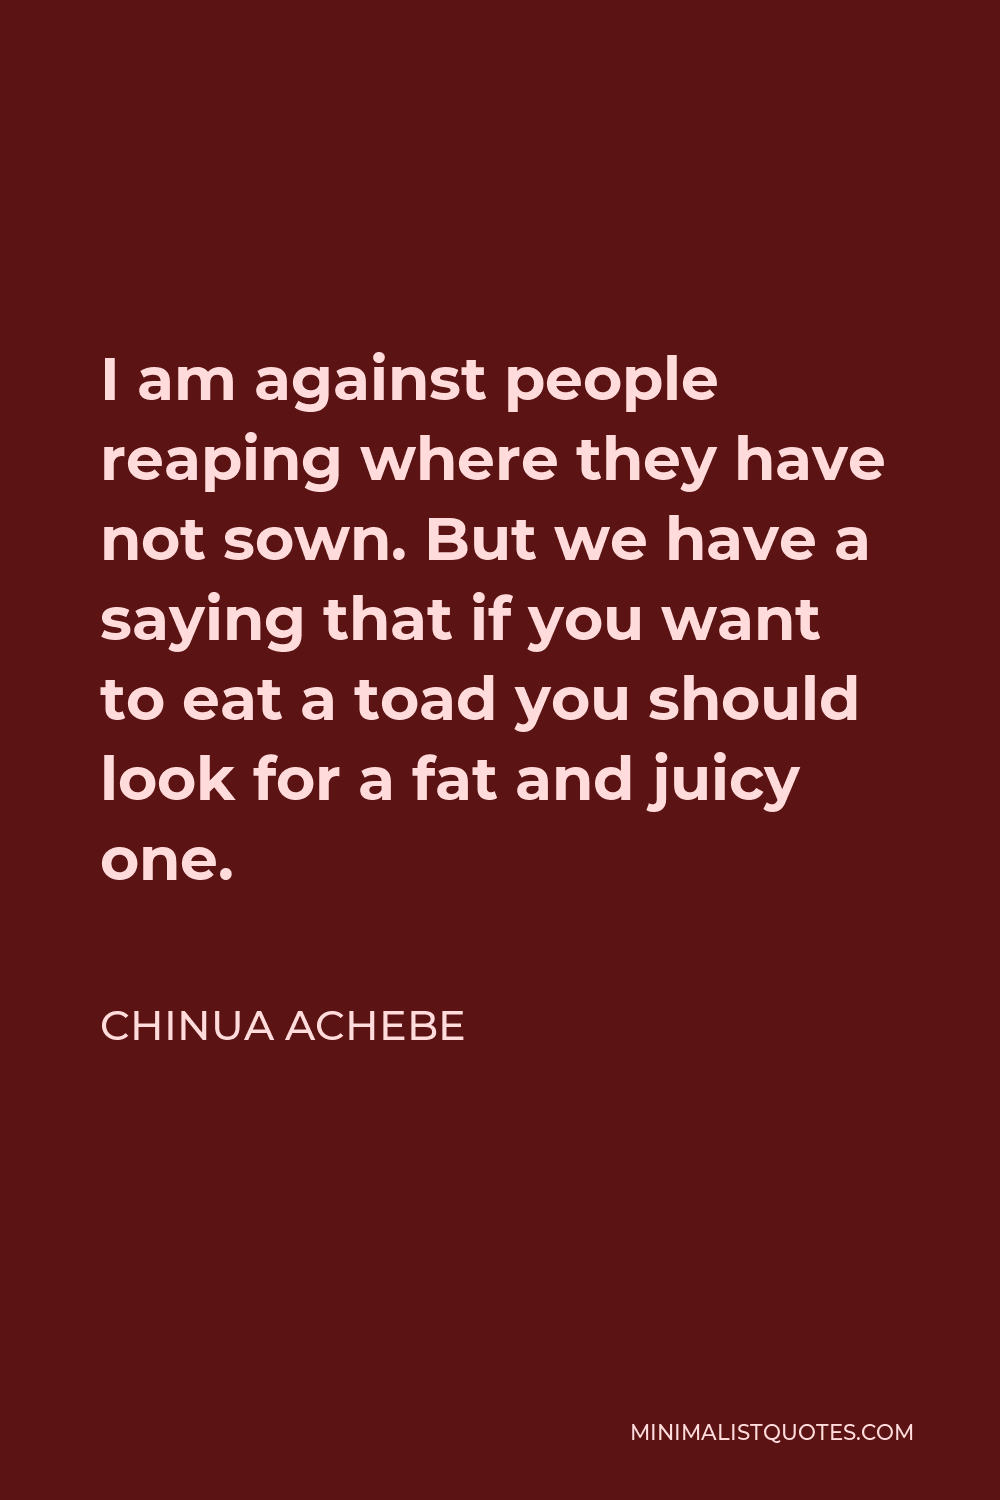 Chinua Achebe Quote - I am against people reaping where they have not sown. But we have a saying that if you want to eat a toad you should look for a fat and juicy one.